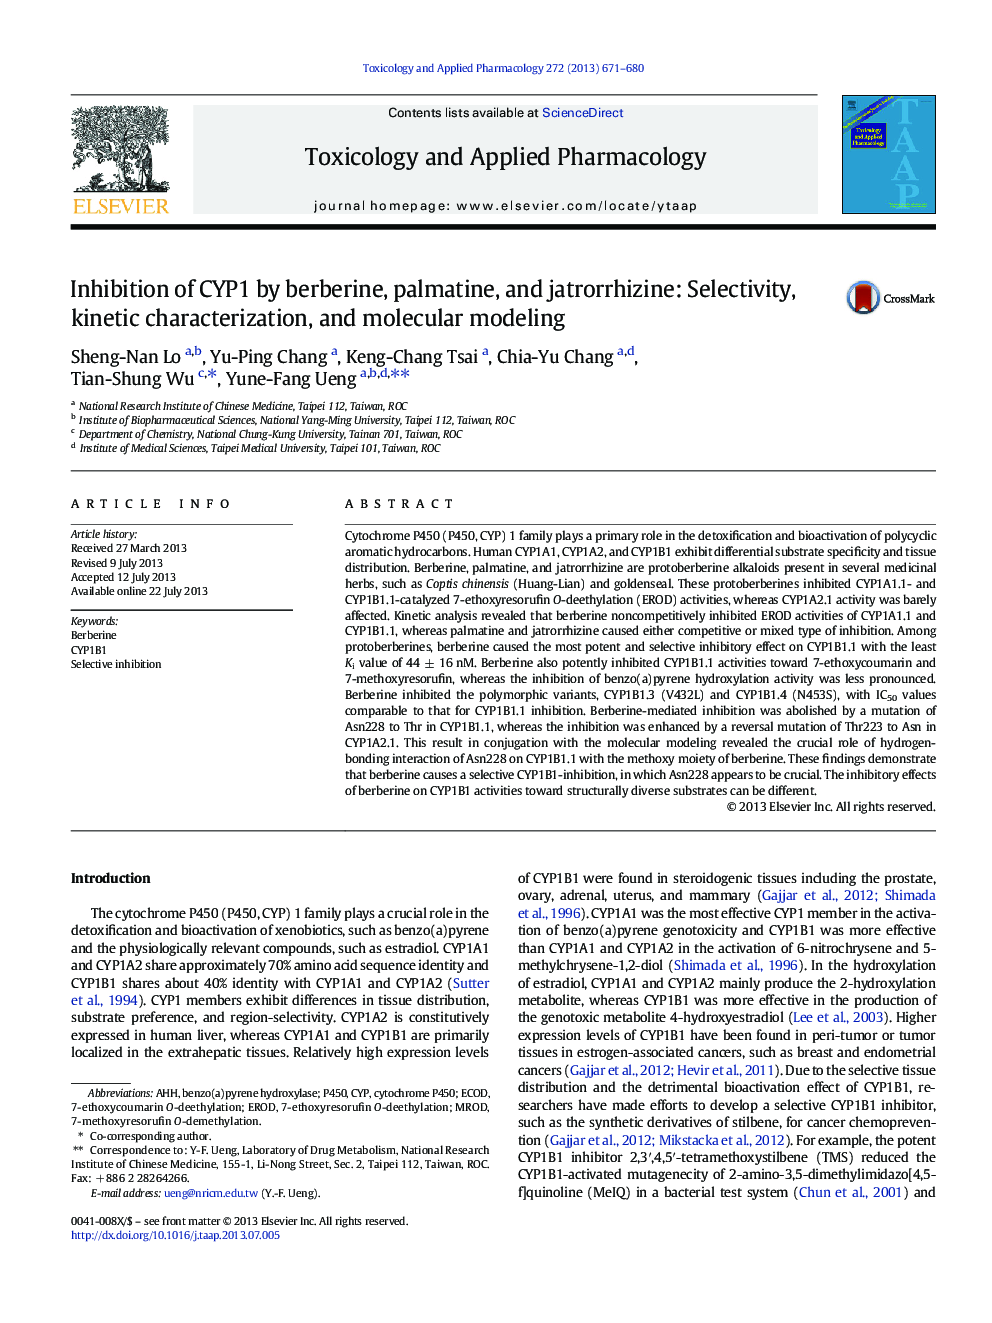 Inhibition of CYP1 by berberine, palmatine, and jatrorrhizine: Selectivity, kinetic characterization, and molecular modeling